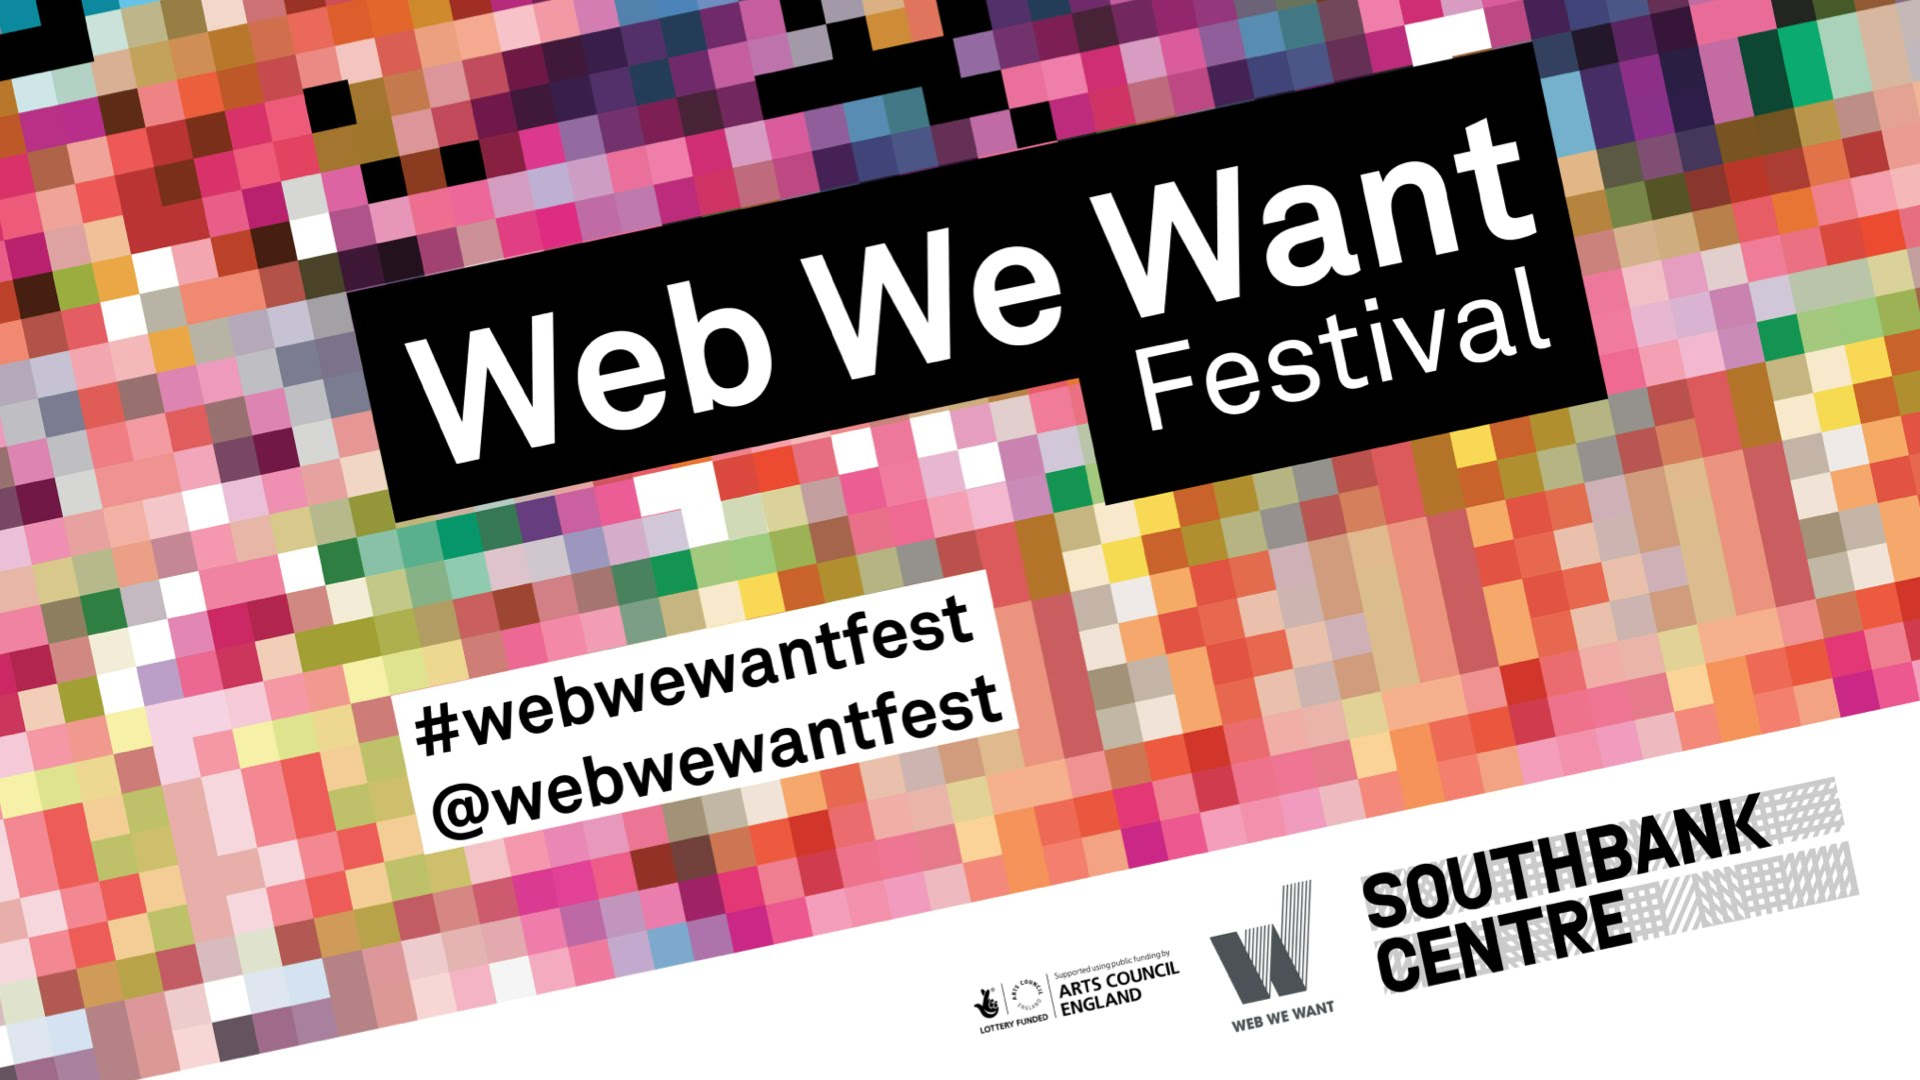 Web We Want Festival at the Southbank Centre